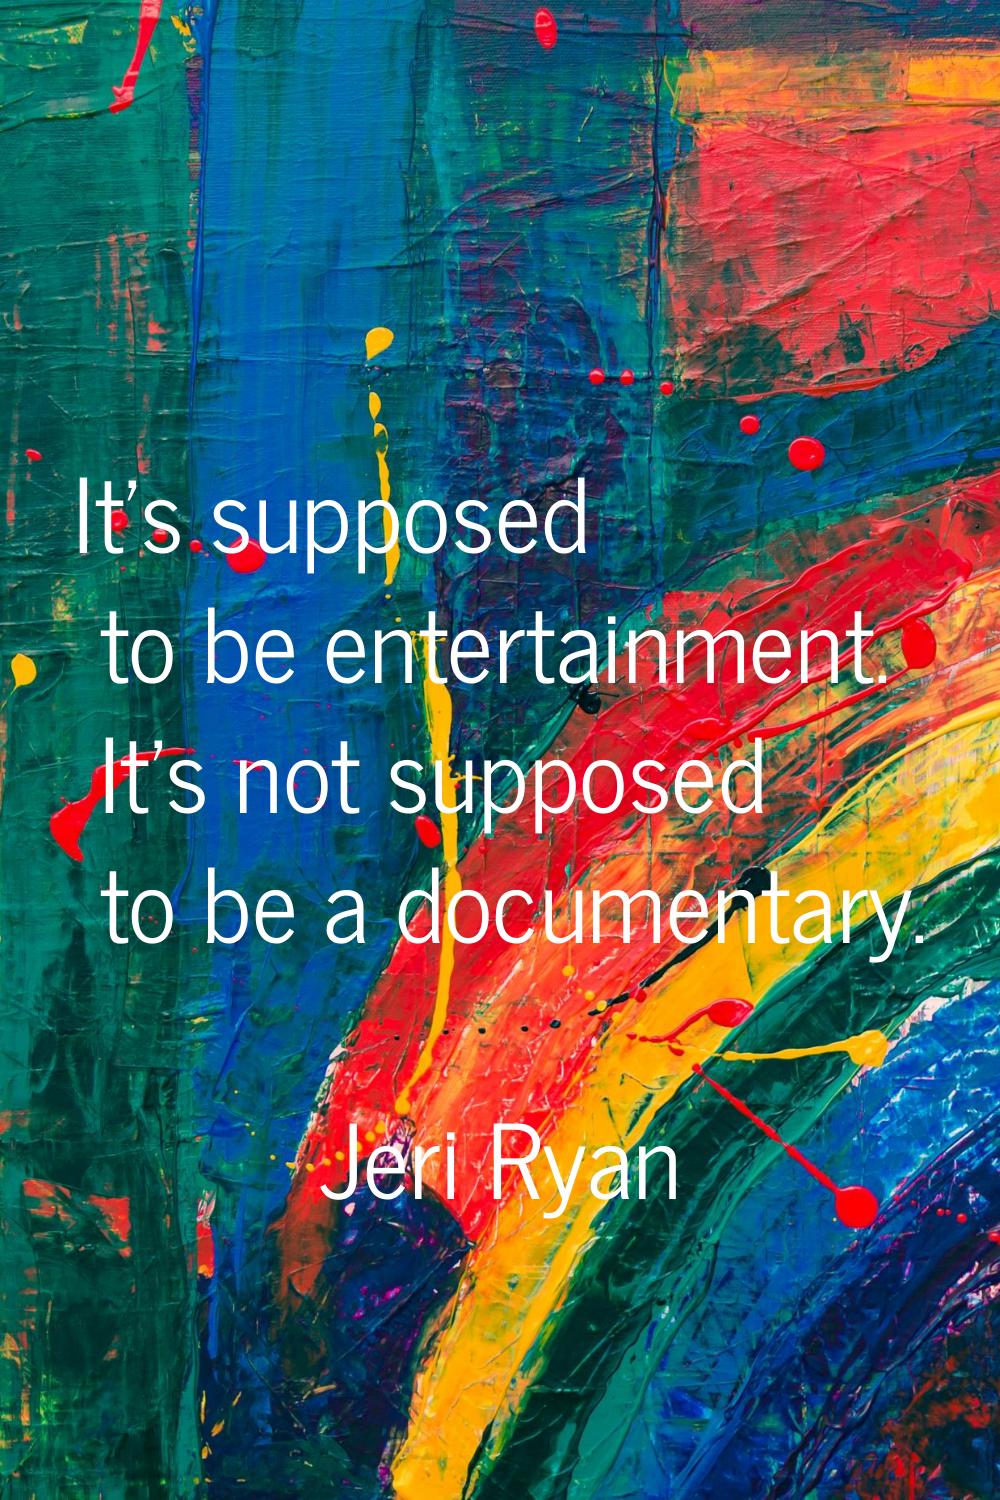 It's supposed to be entertainment. It's not supposed to be a documentary.